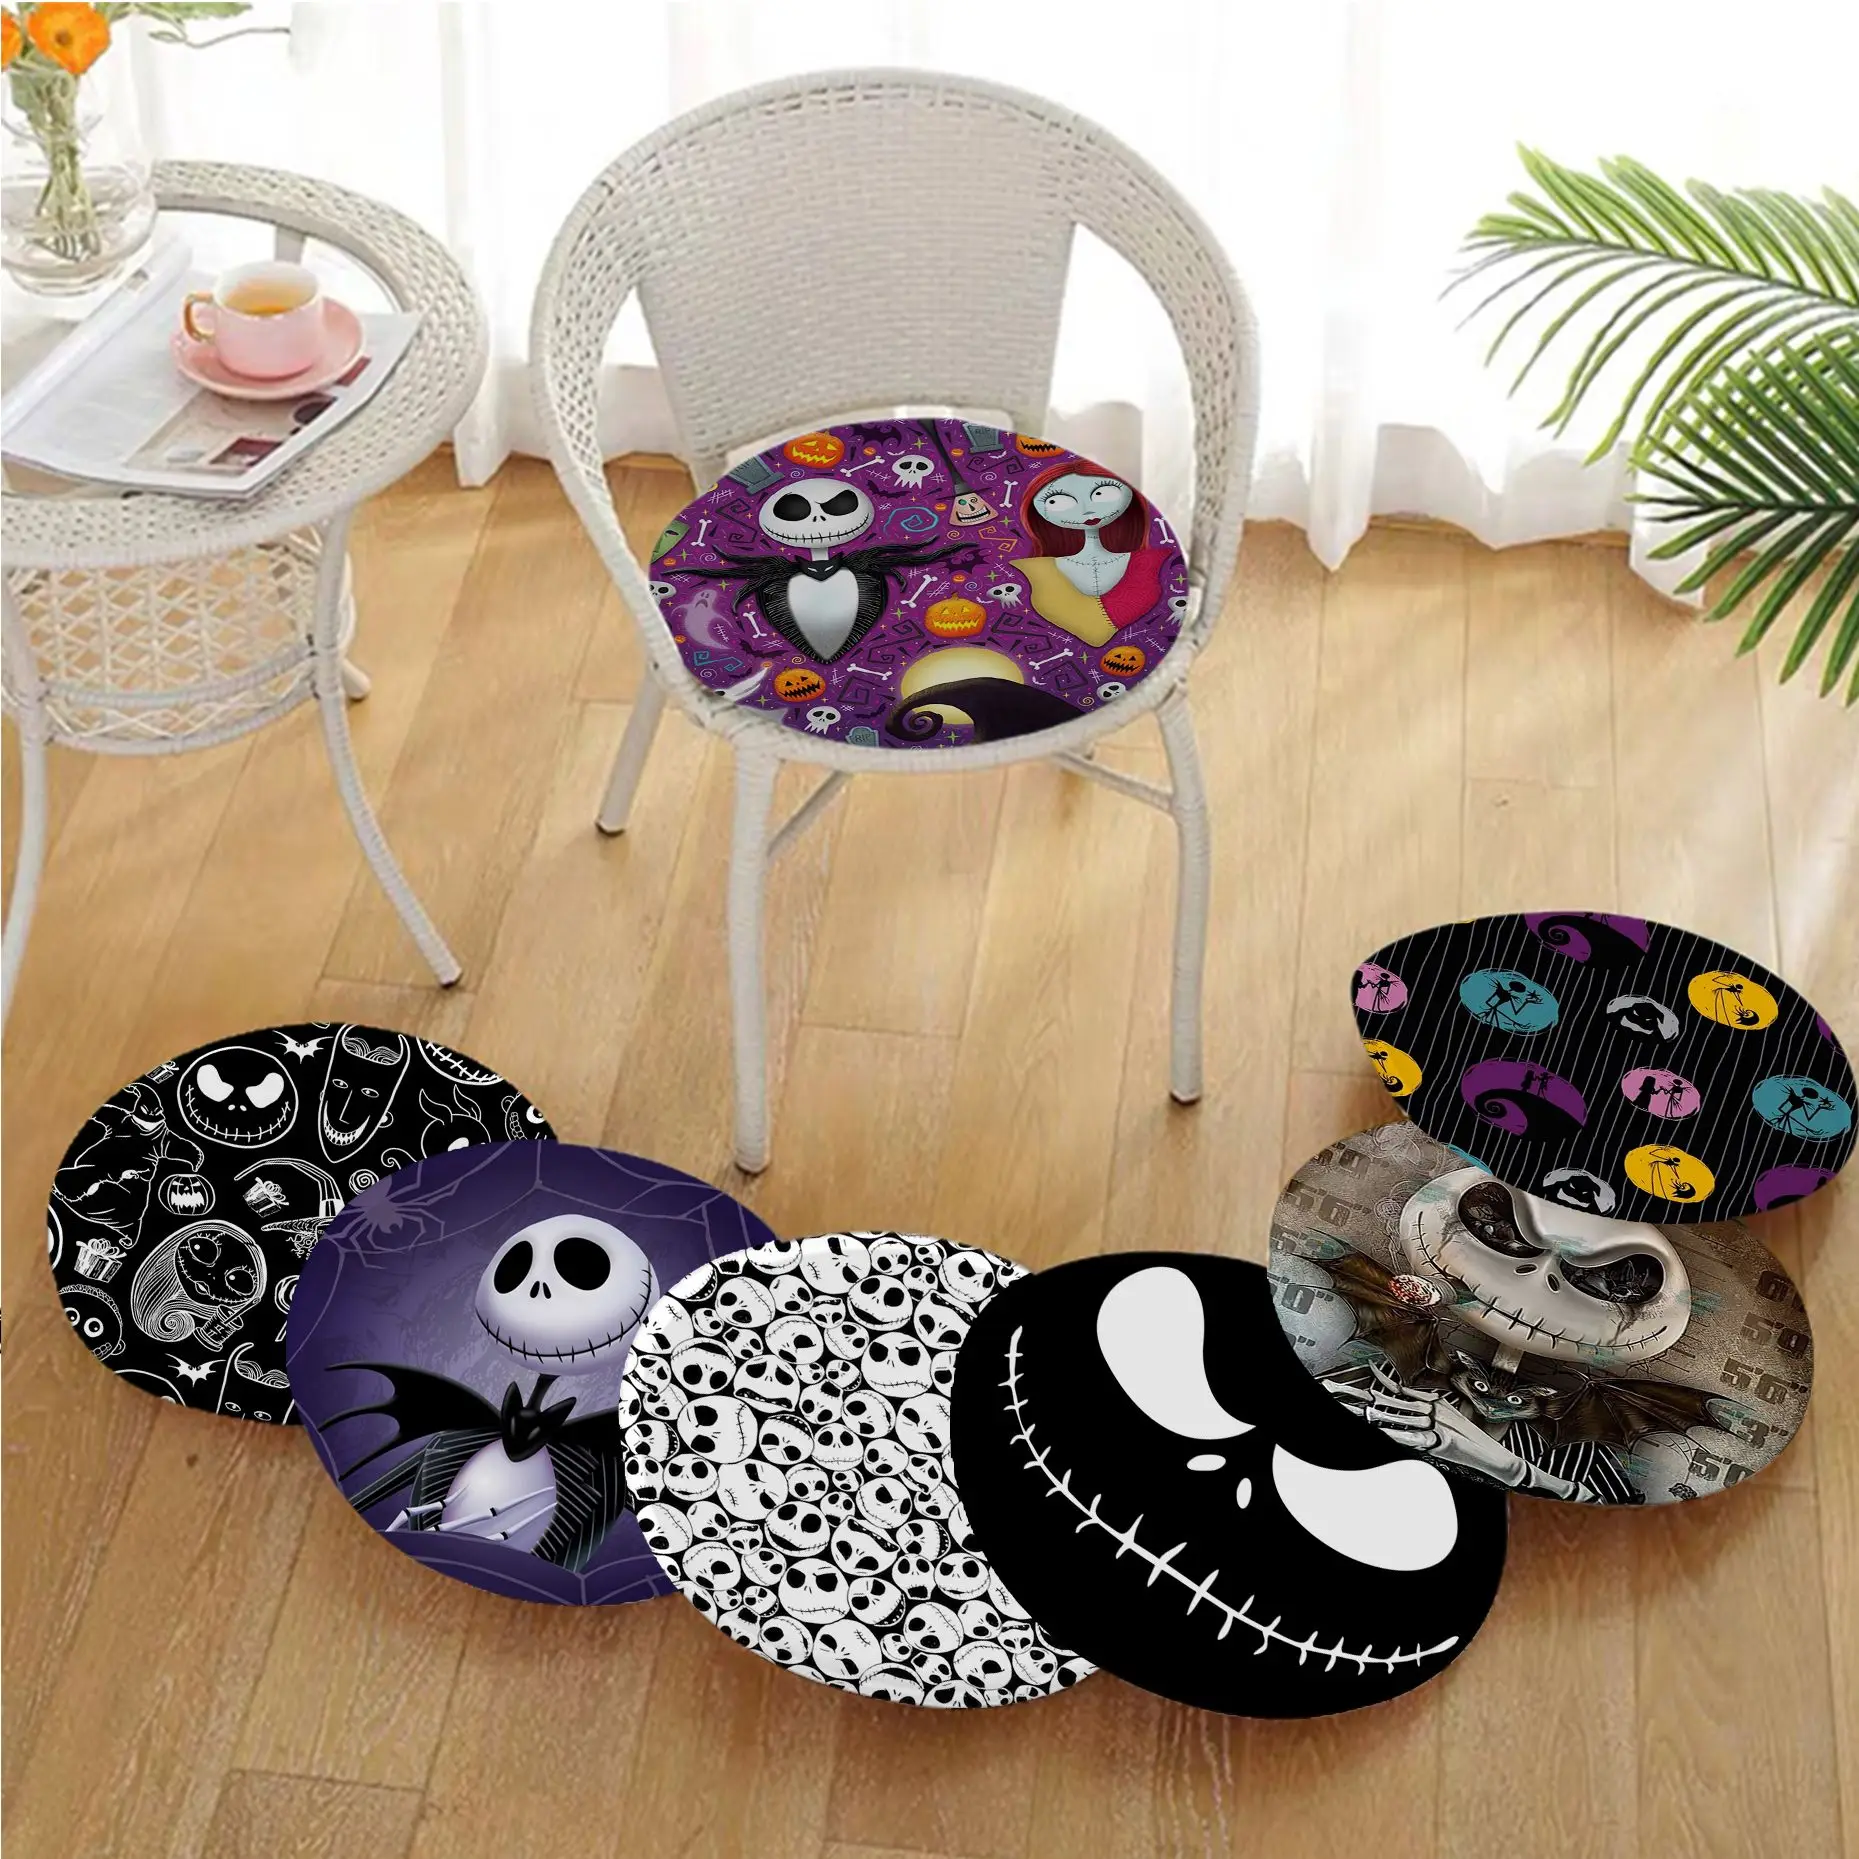 

Disney The Nightmare Before Christmas Decorative Chair Mat Soft Pad Seat Cushion For Dining Patio Home Office Buttocks Pad